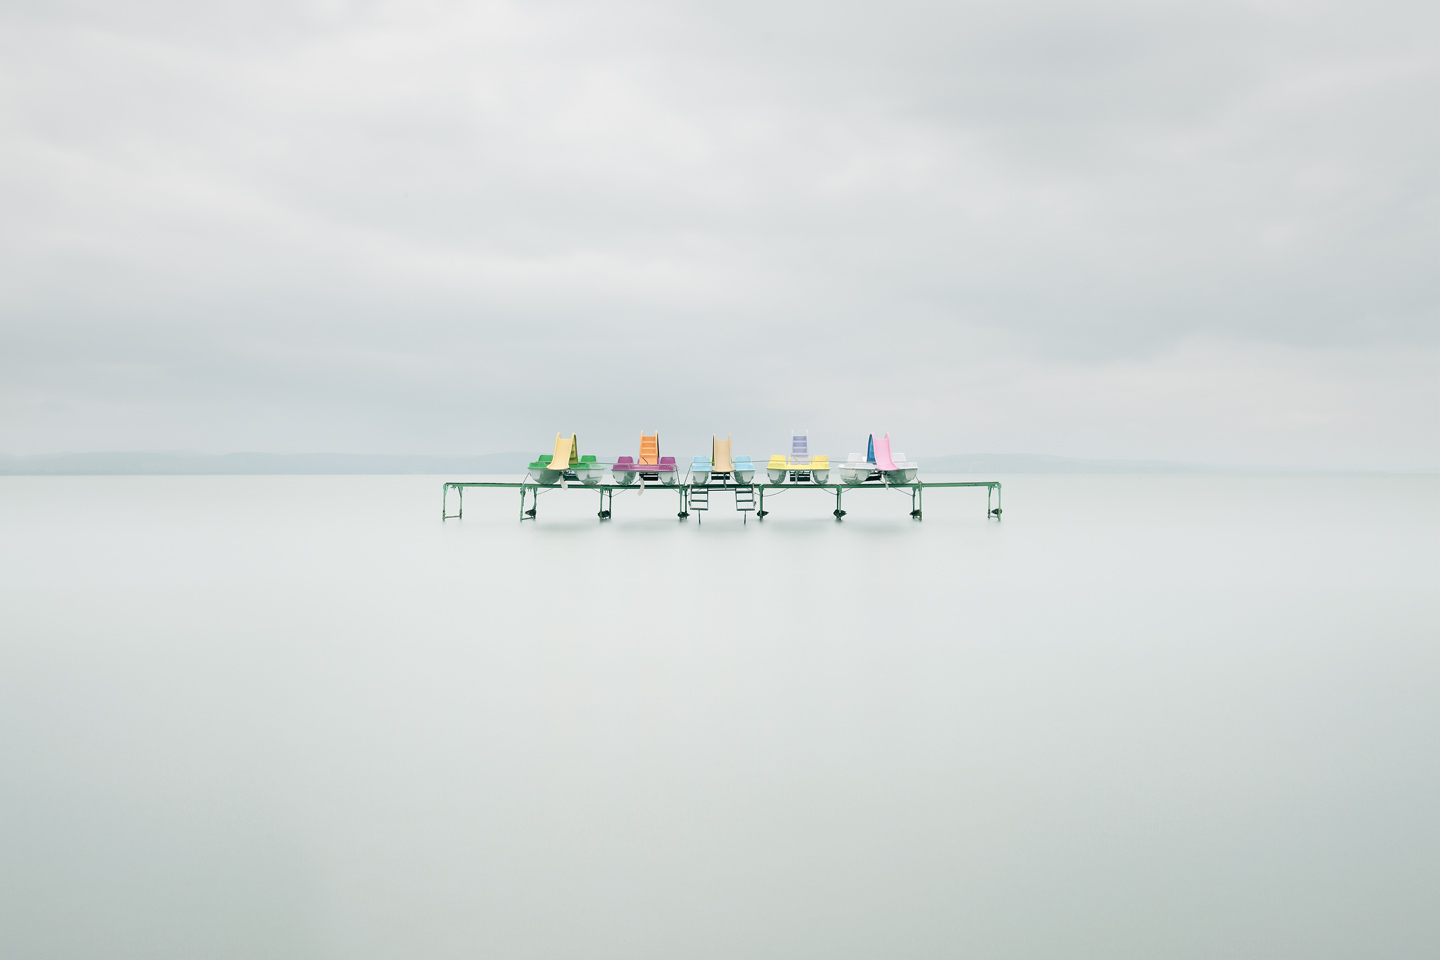 Pedal Boats, by Akos Major (Hungary)

1st place winner in the Landscape/Seascape/Nature category